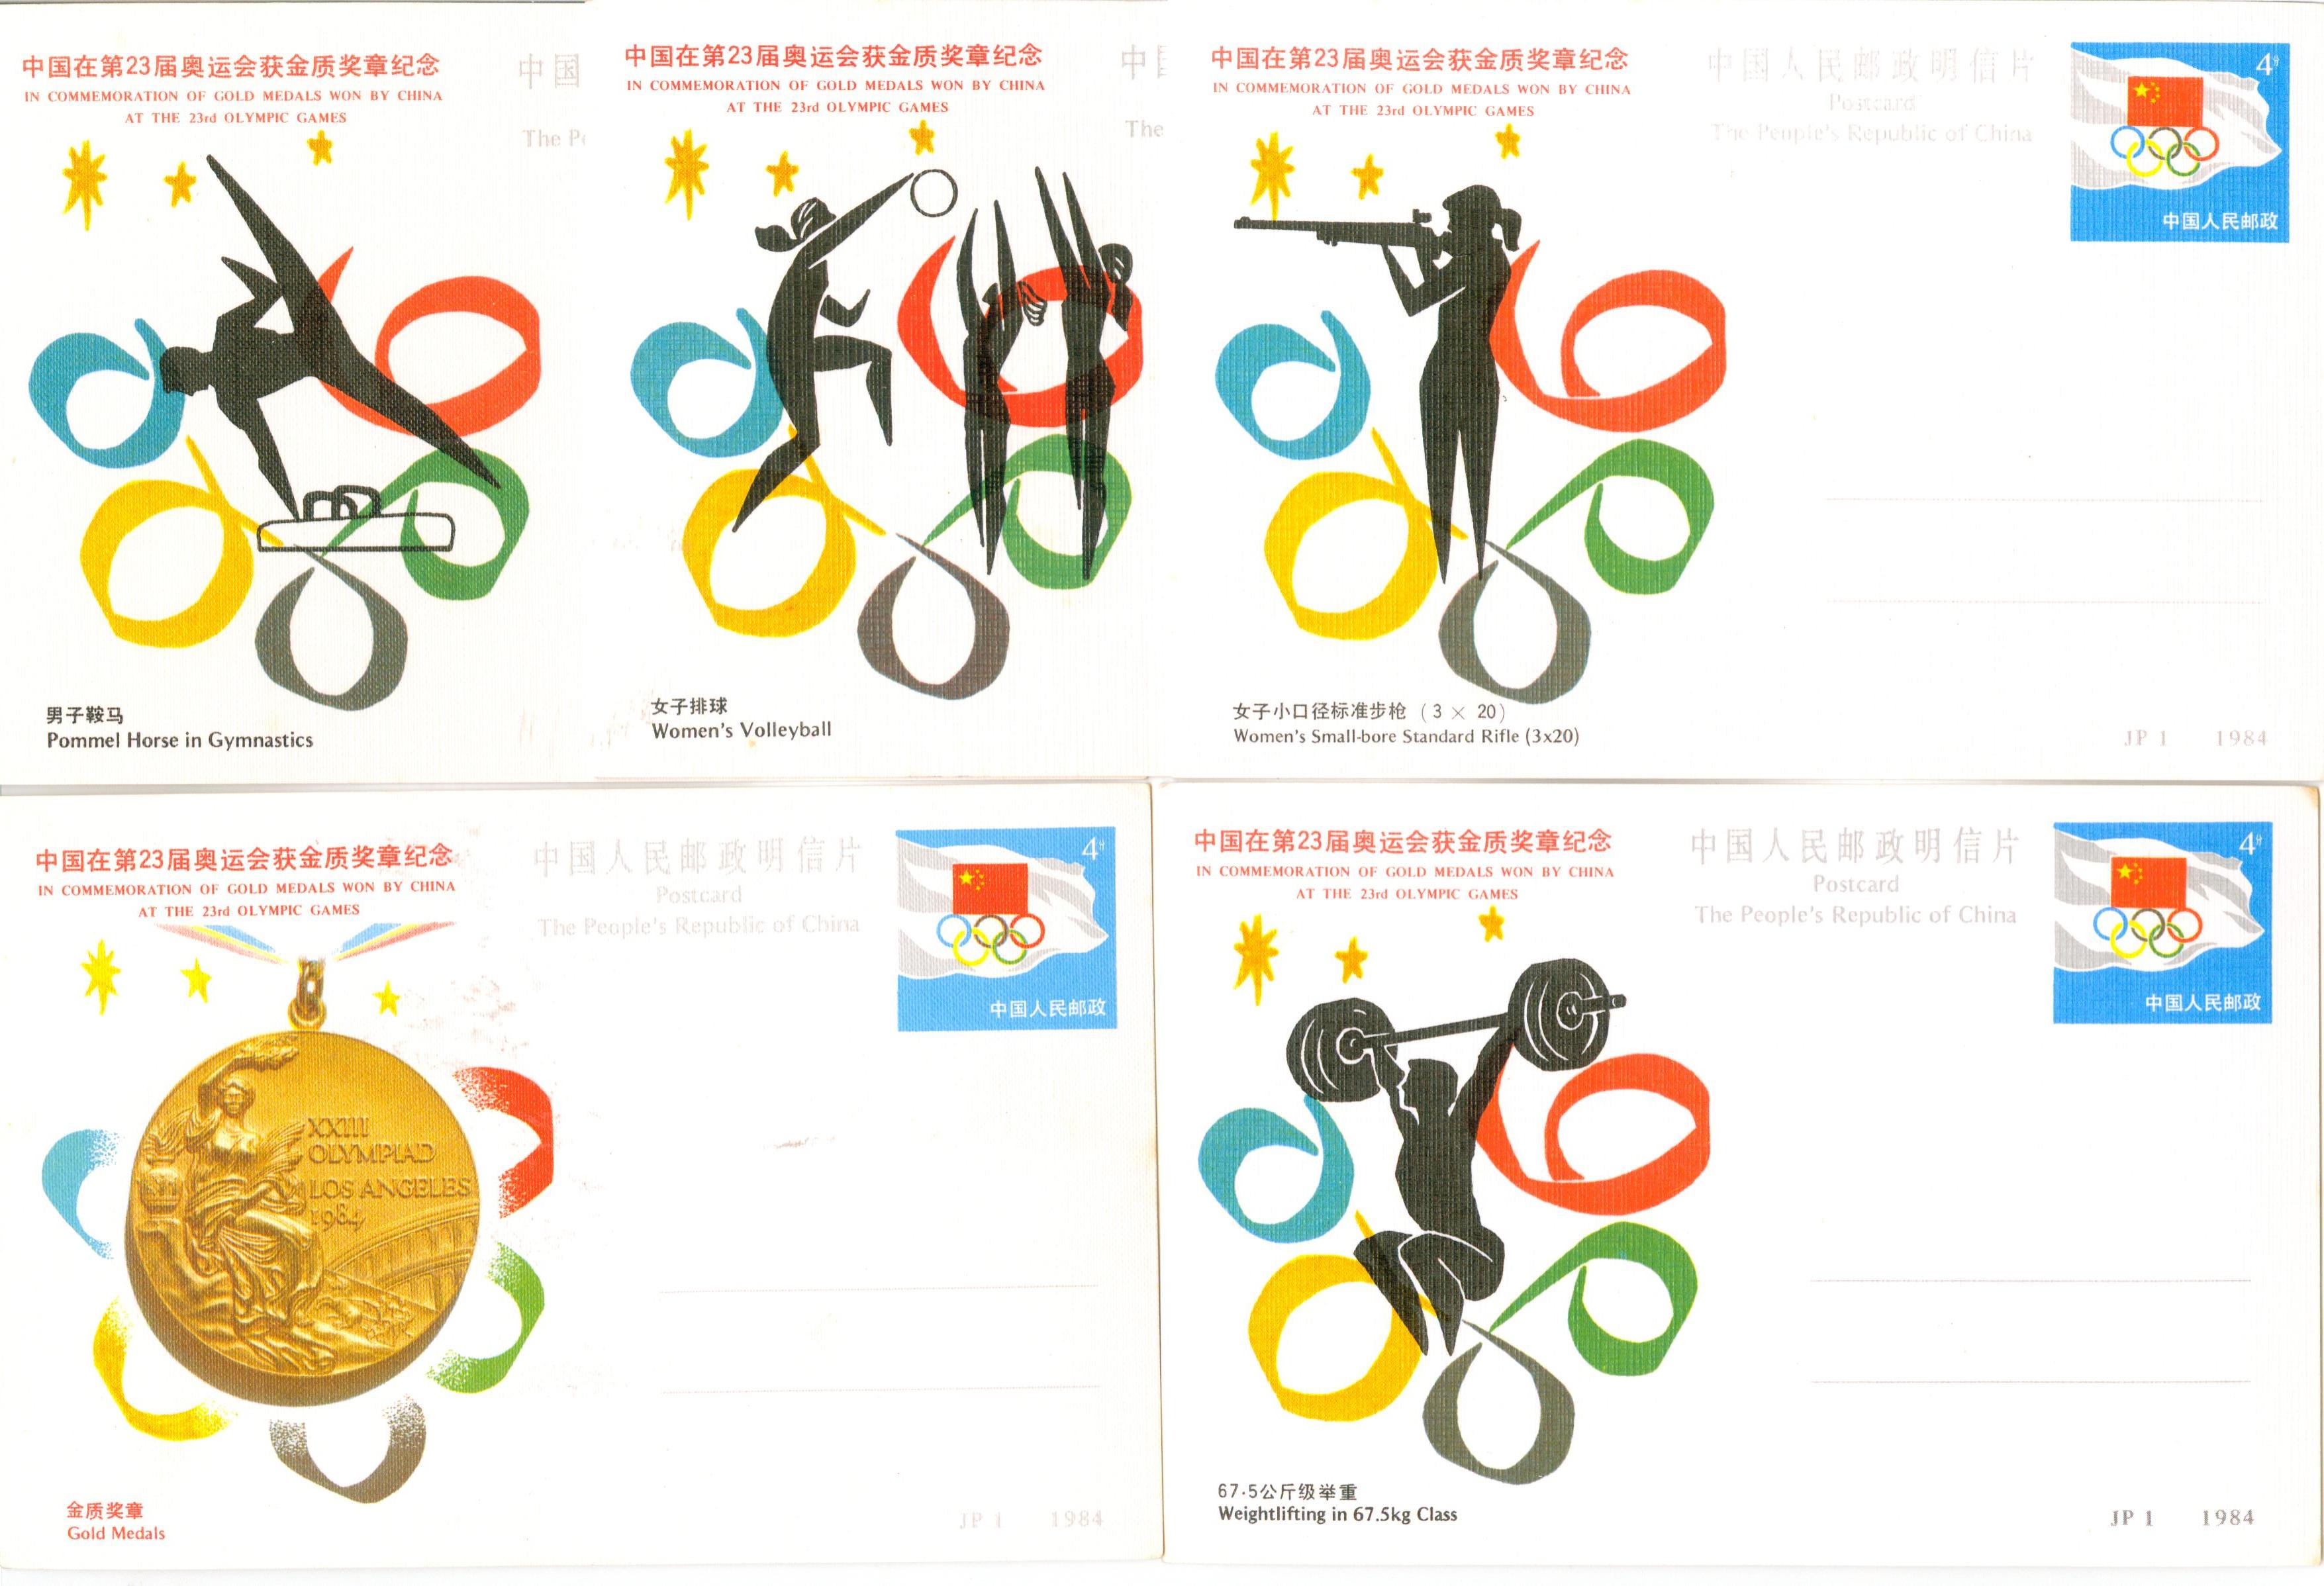 JP1, China at the 23th Olympic Games 1984 (P.R.China First Postal Cards) - Click Image to Close